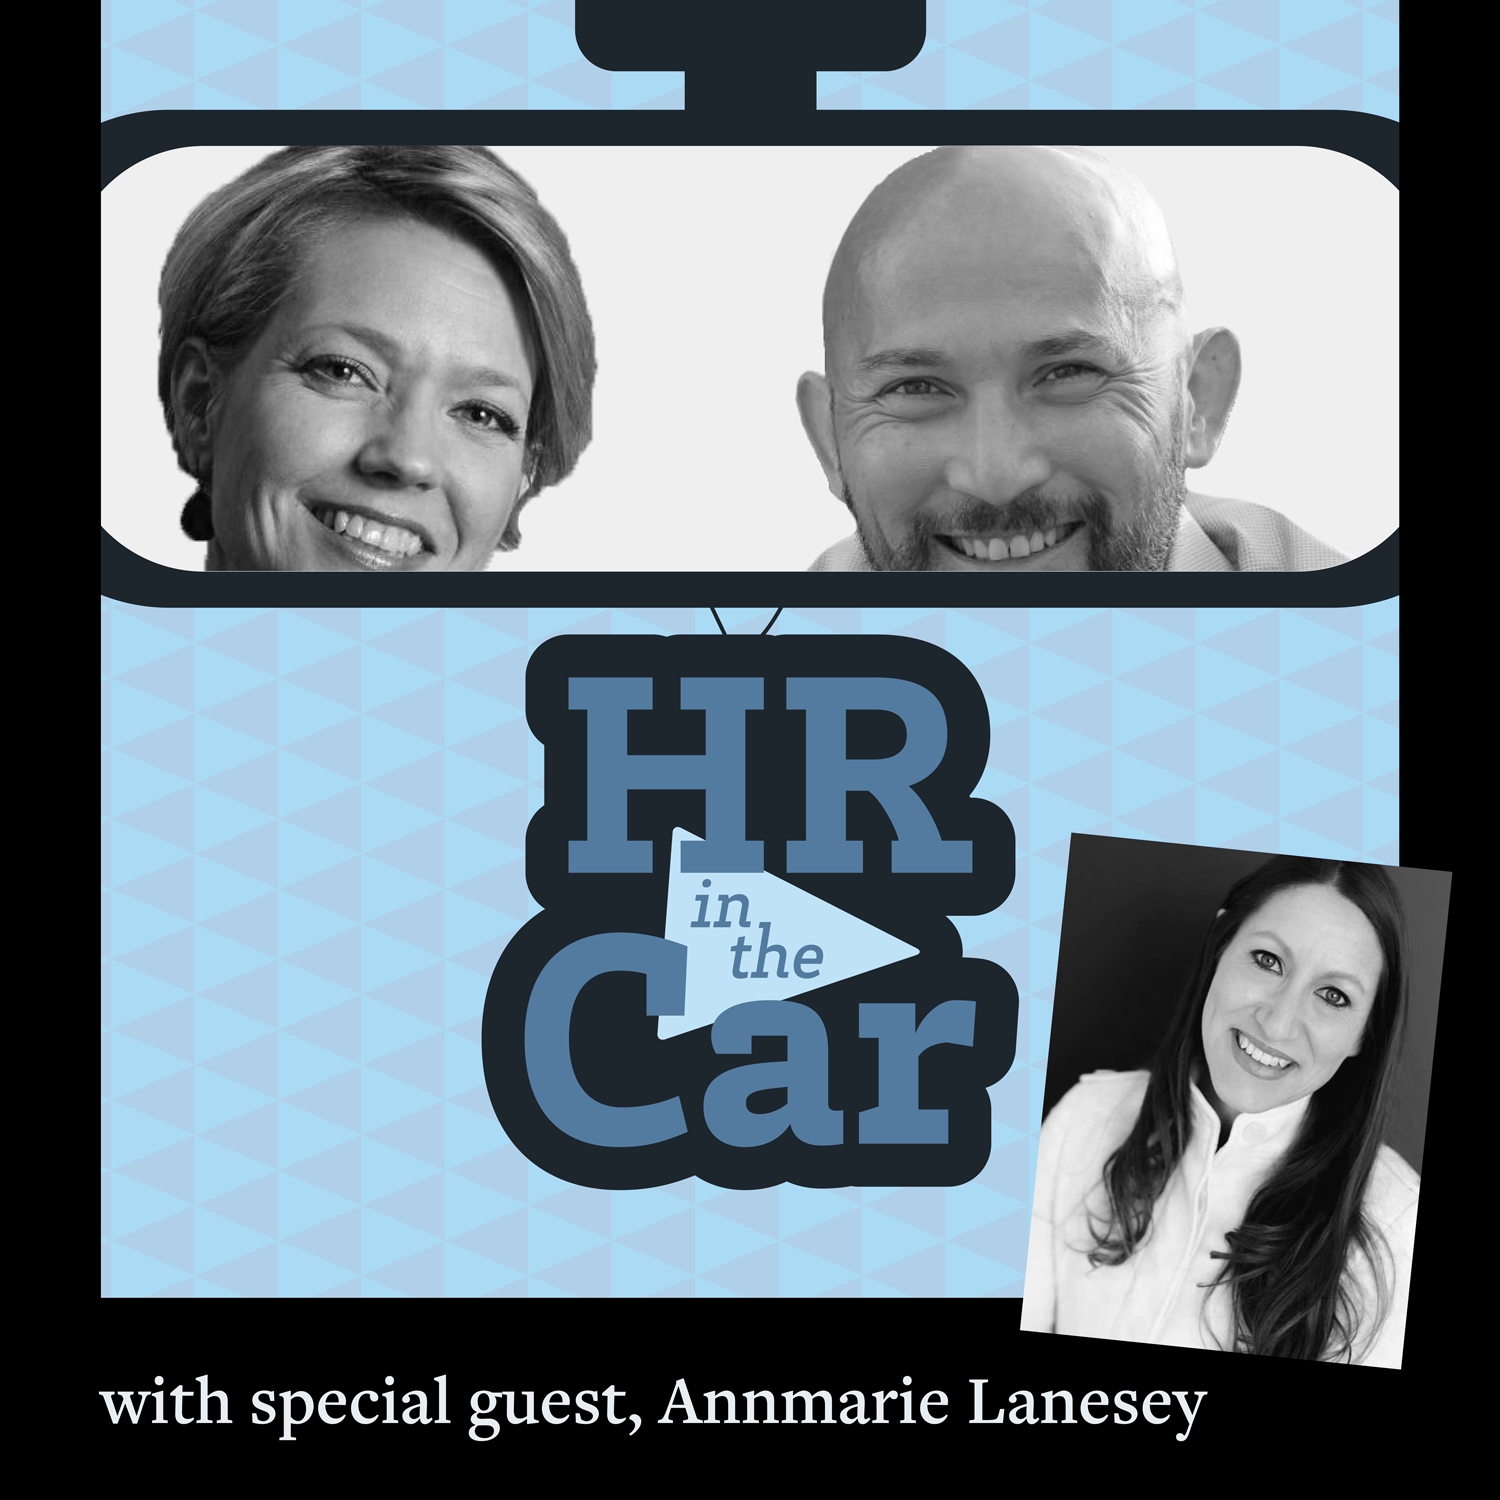 HR in the CAR - Episode 17: "An Alternative Pipeline of Talent"